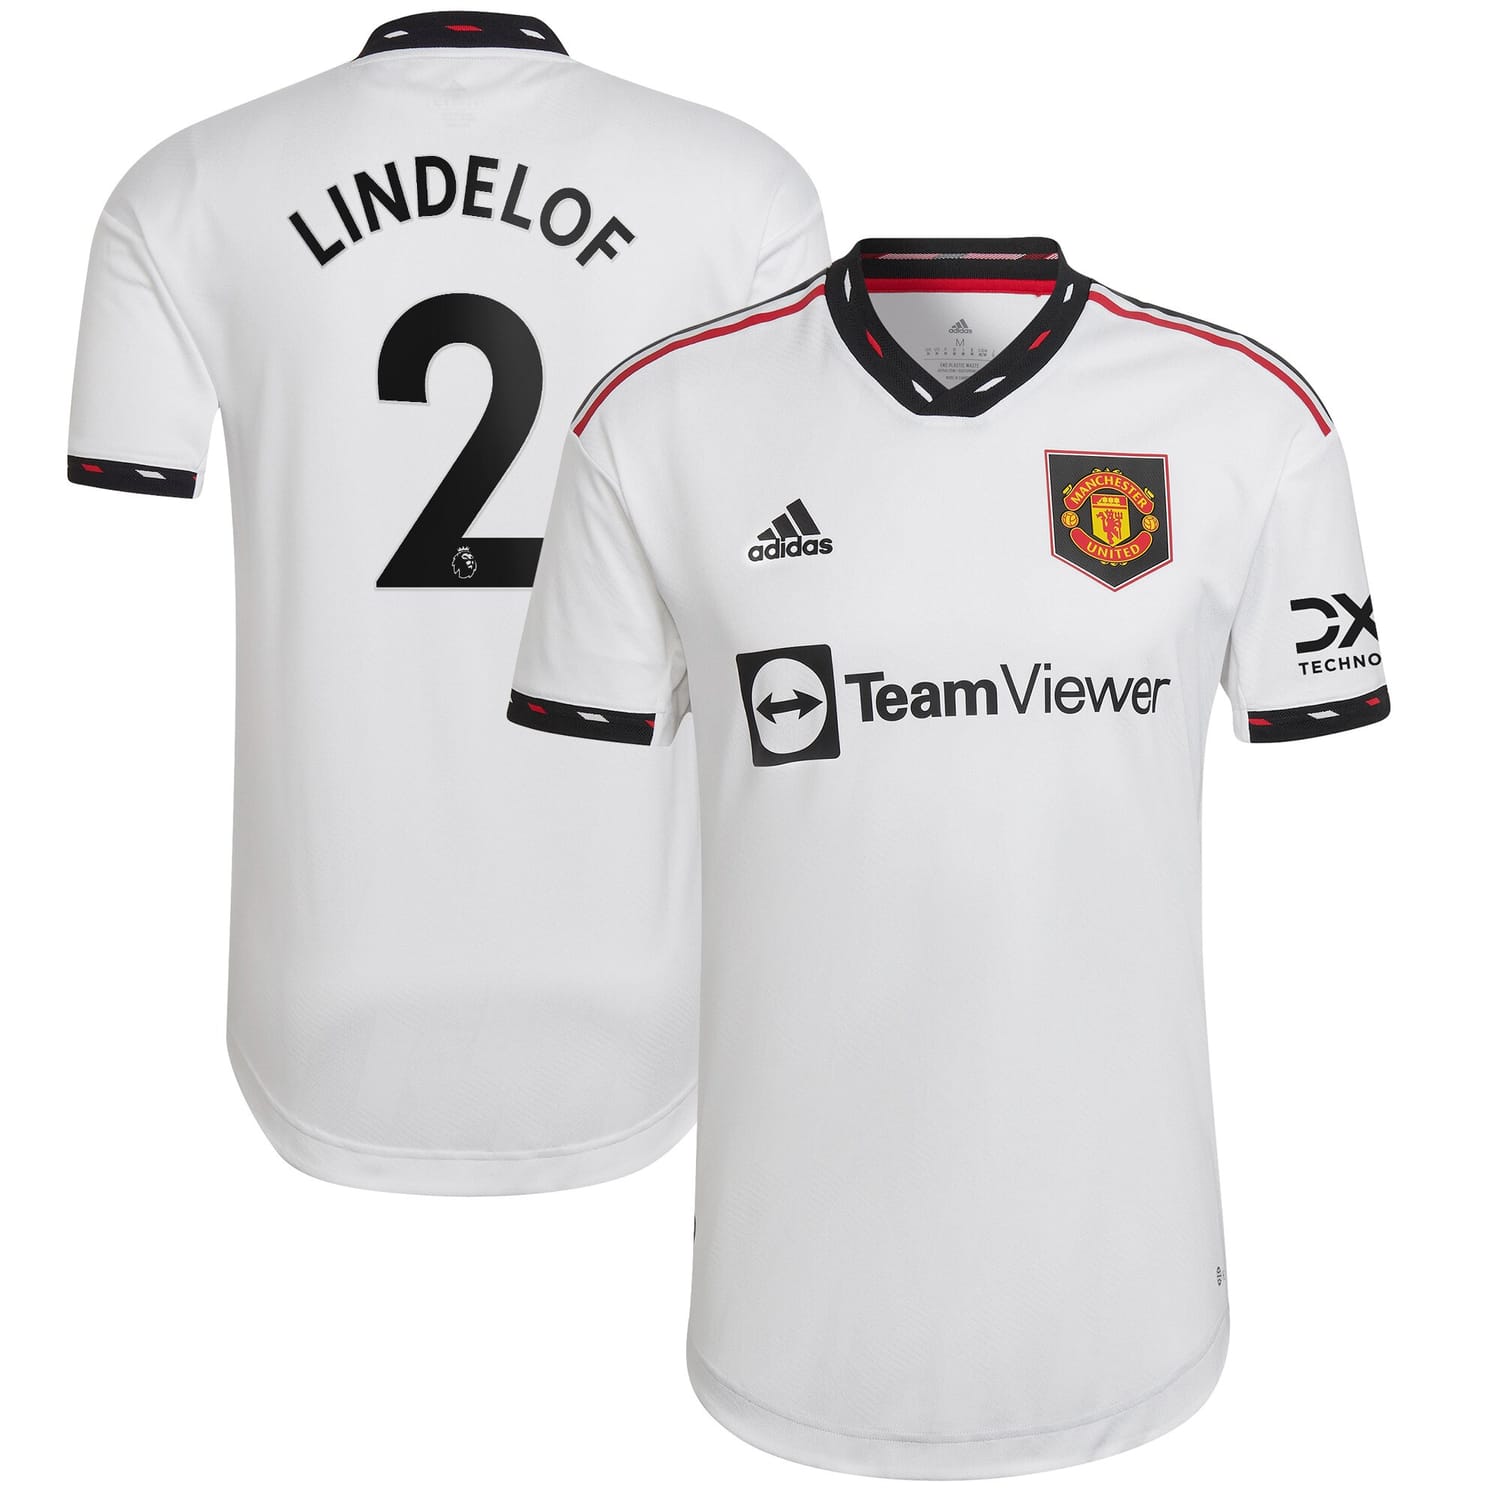 Premier League Manchester United Away Authentic Jersey Shirt 2022-23 player Victor Lindelöf 2 printing for Men